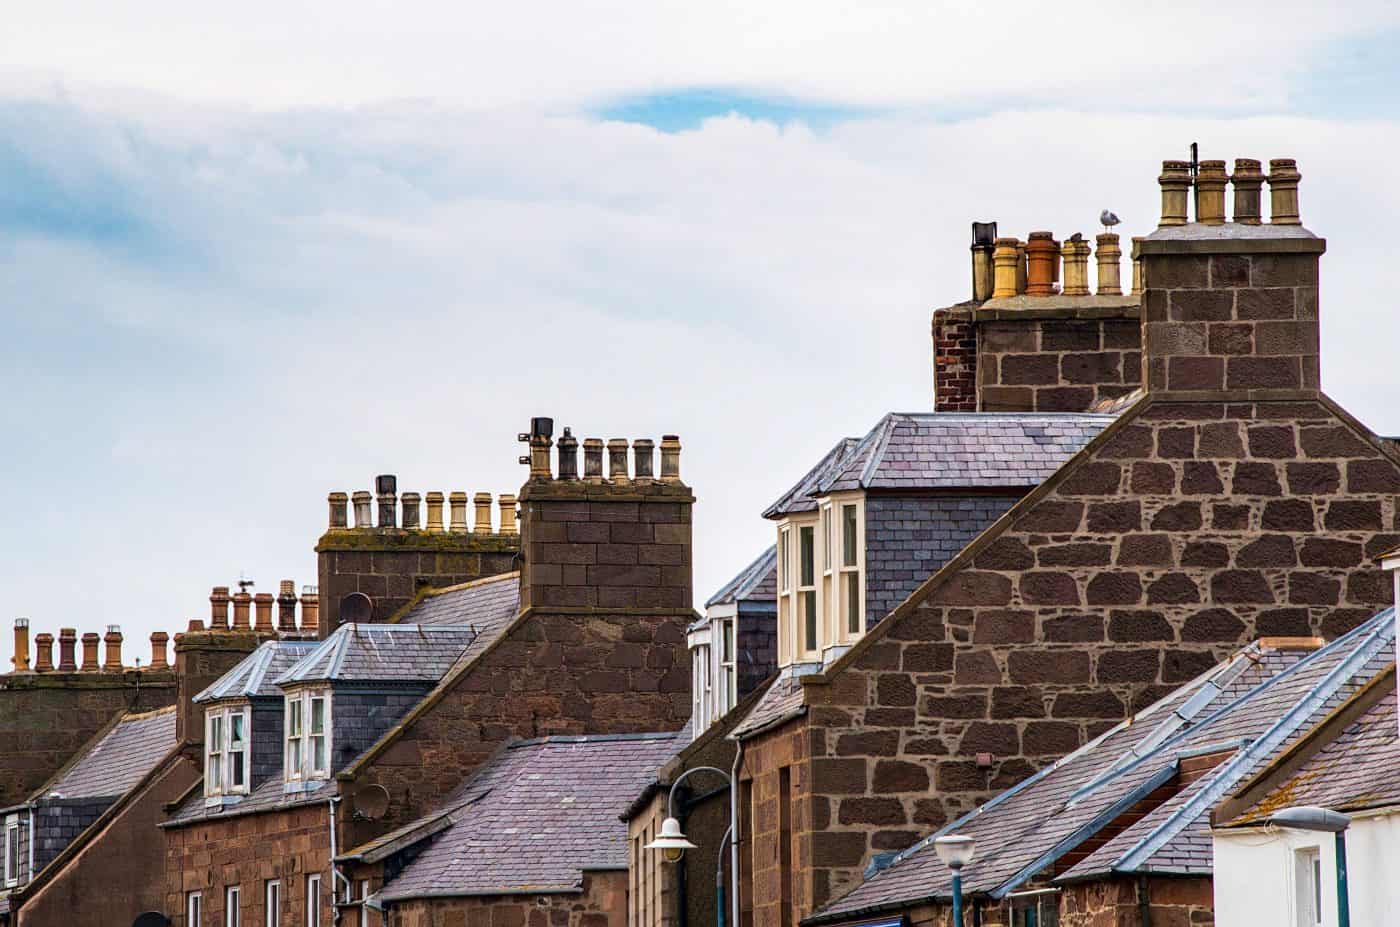 Rooftops with chimneys